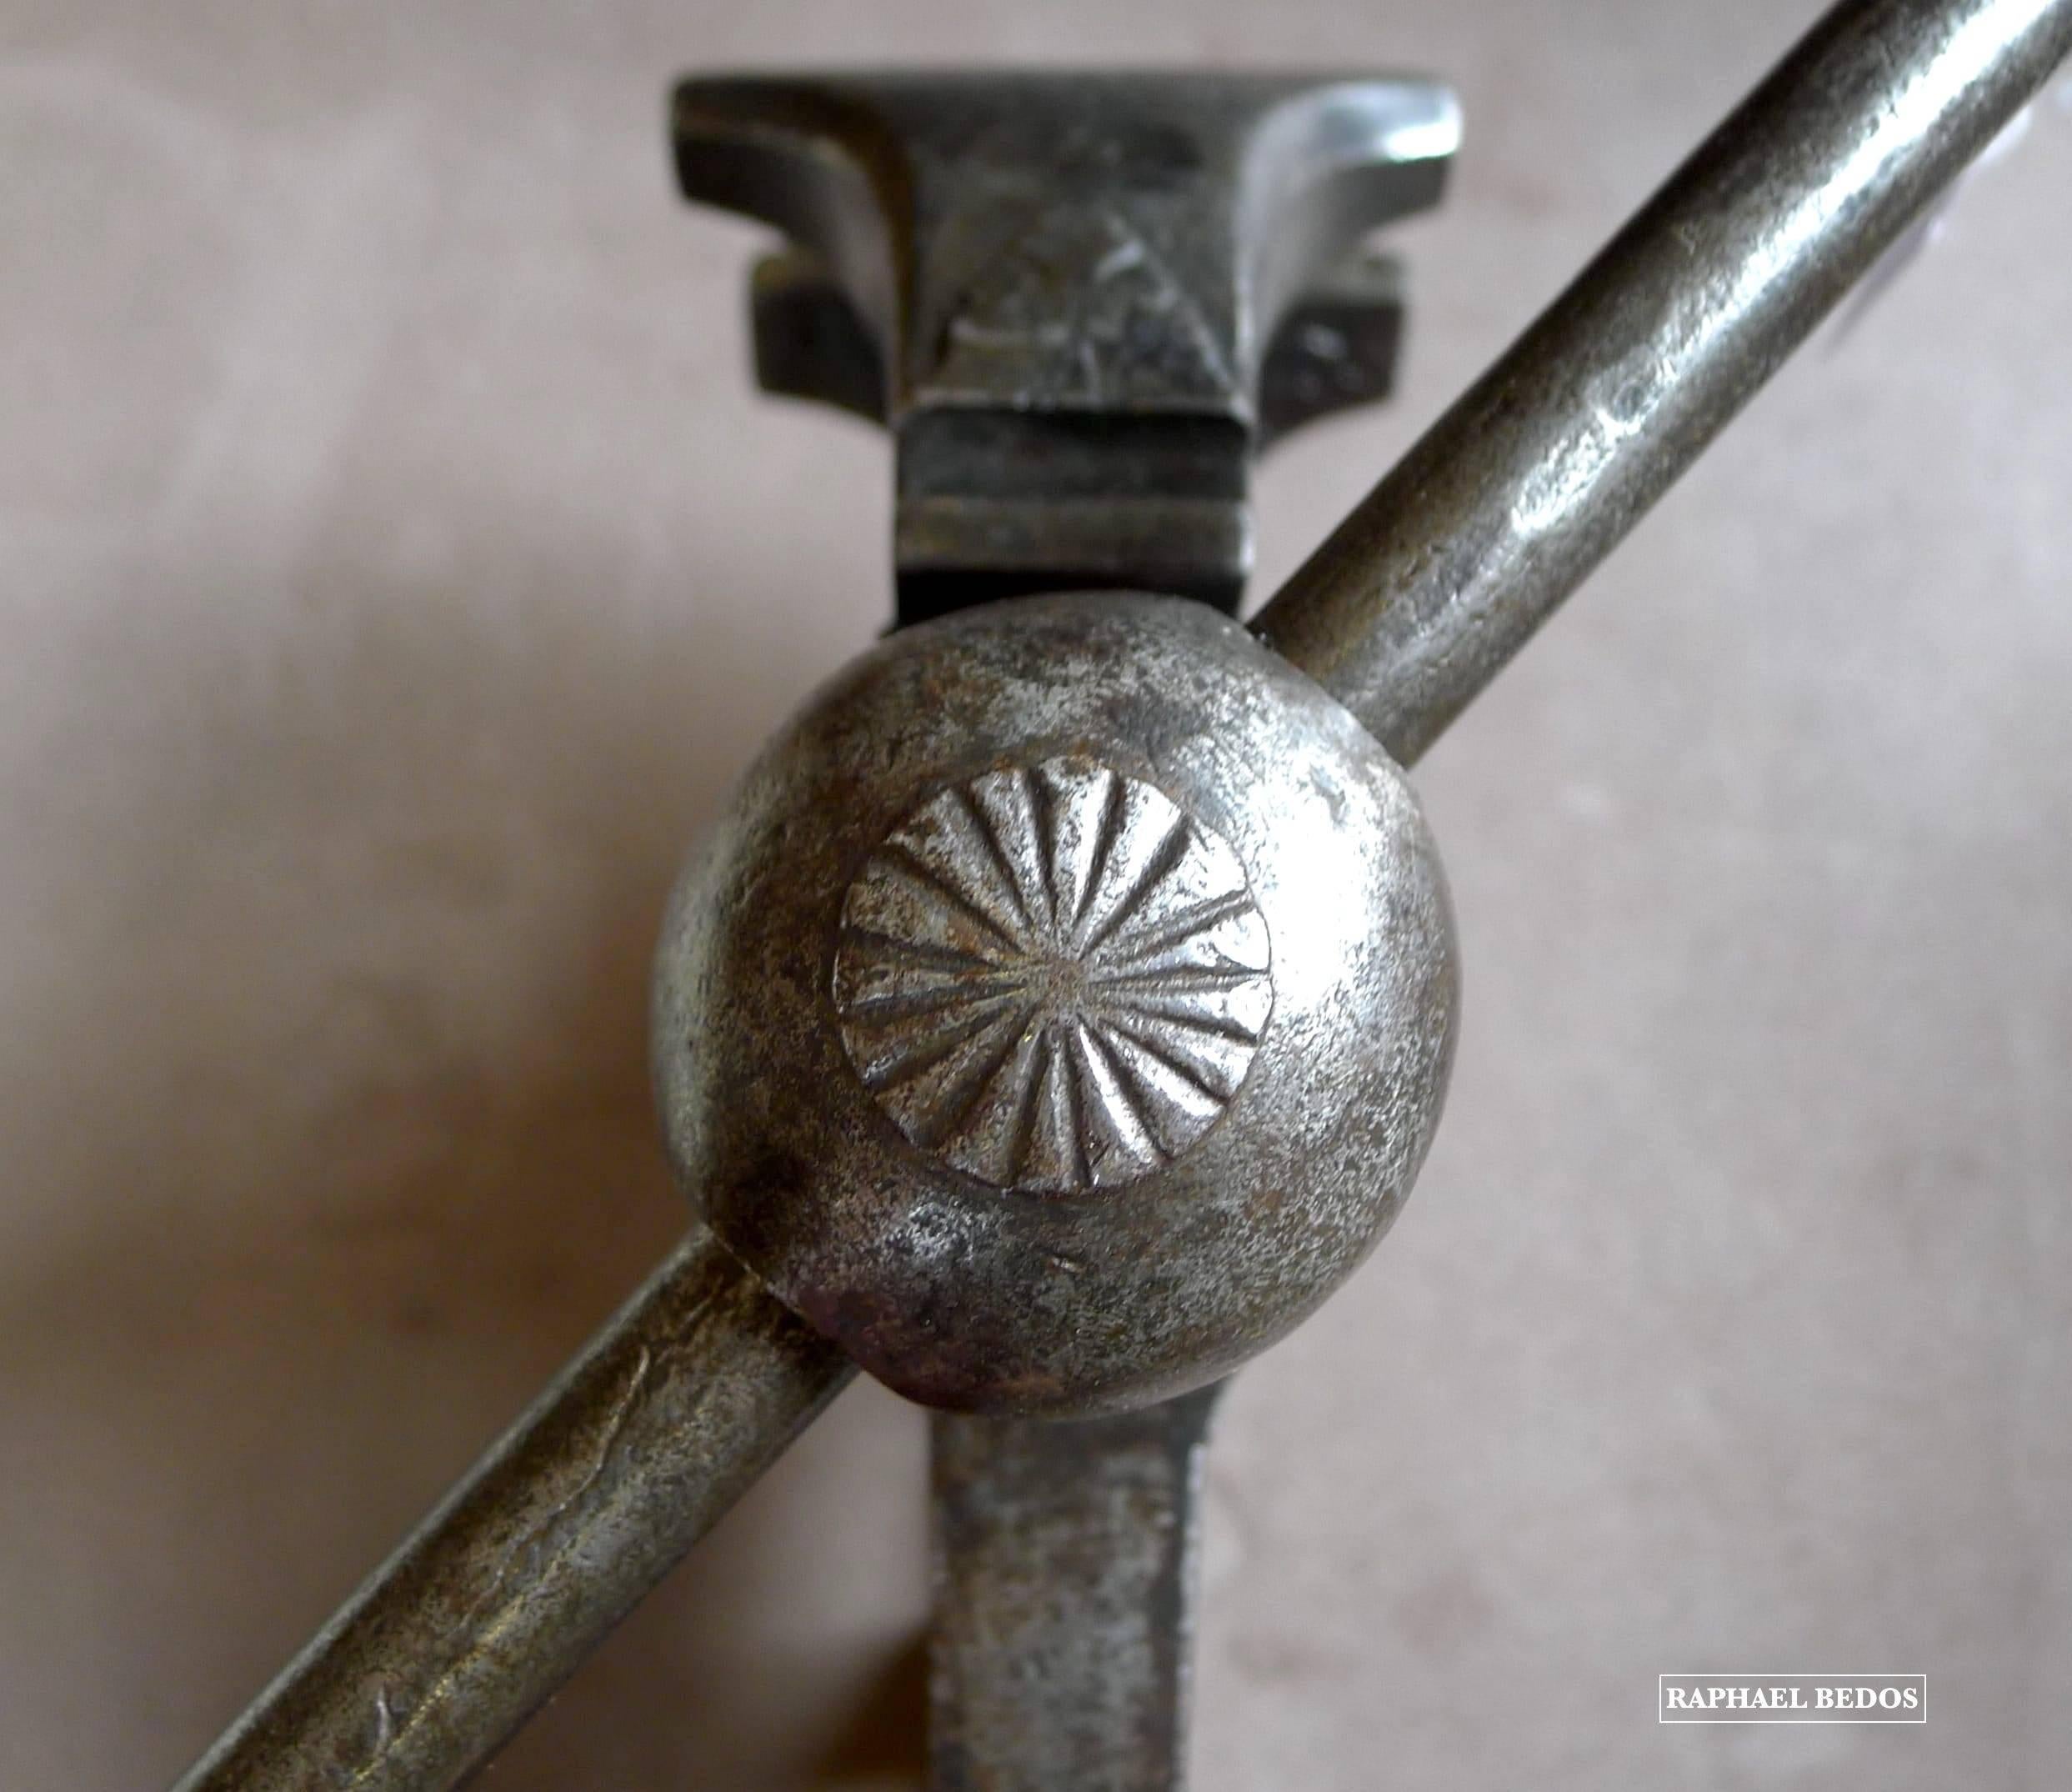 France

Iron

Dated de 1723

Functional.